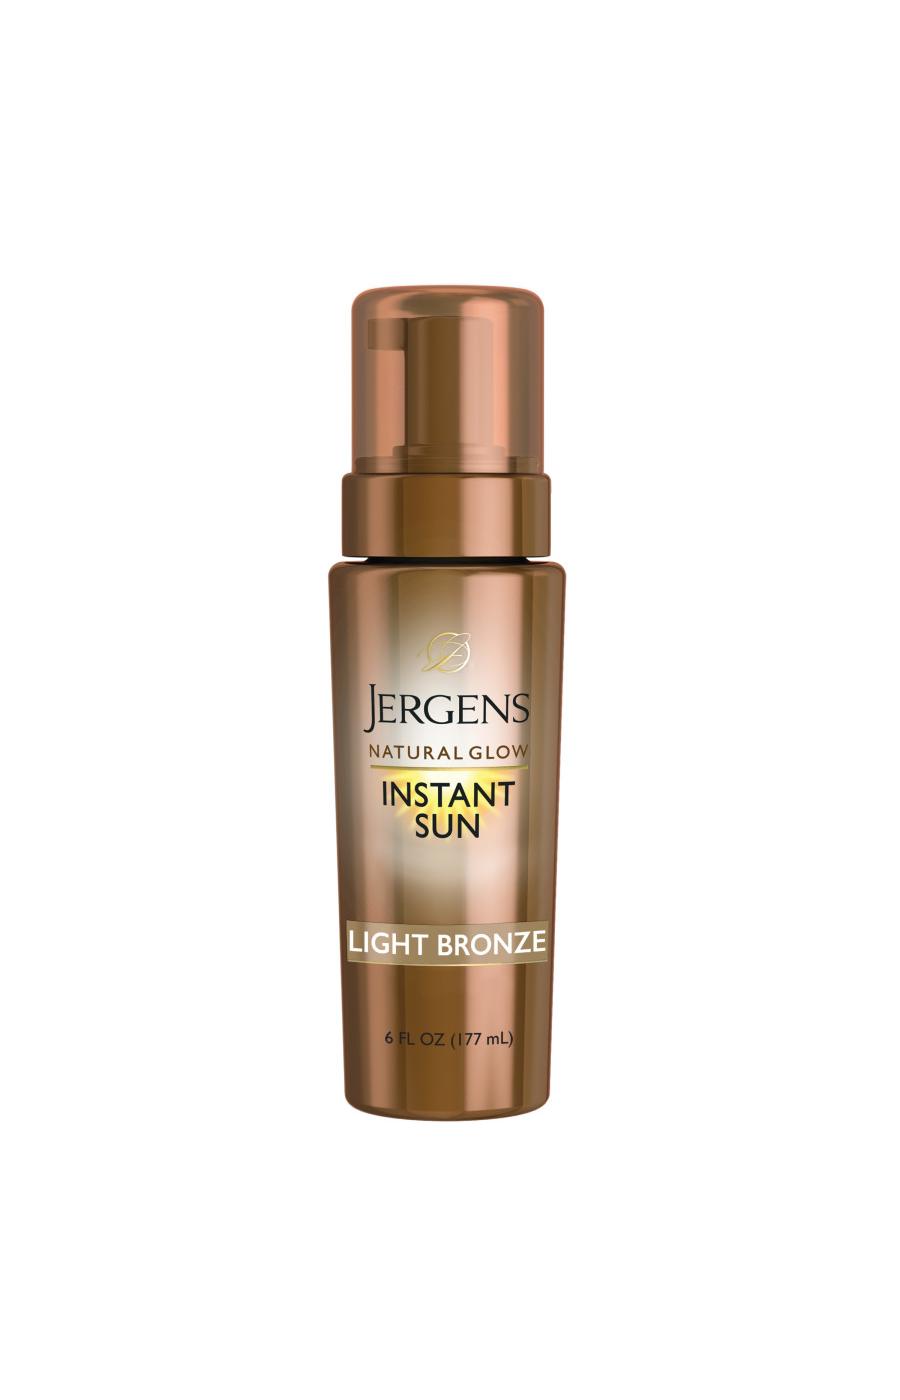 Jergens Natural Glow Instant Sun Light Bronze Tanning Mousse; image 1 of 10